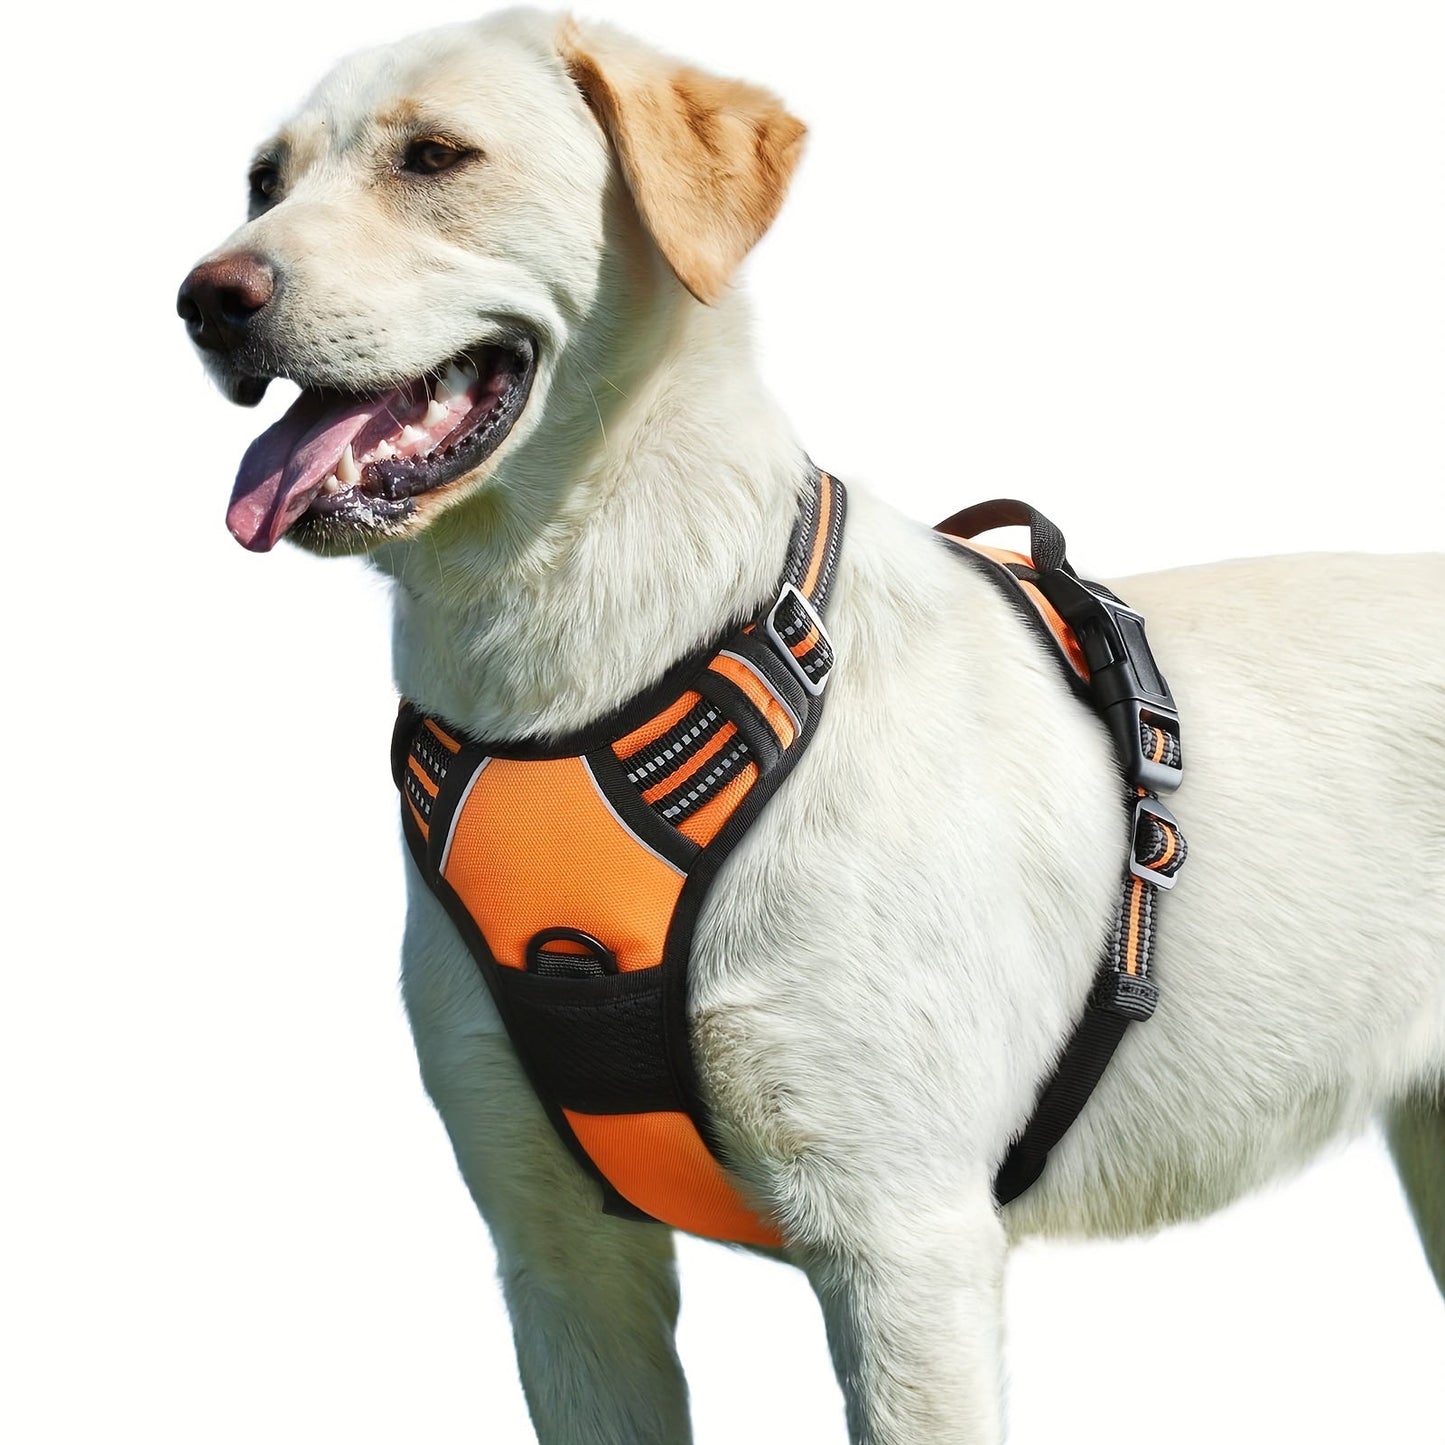 Reflective No-Pull Dog Harness with Easy Control Handle and Adjustable Soft Padding for Small, Medium, and Large Dogs